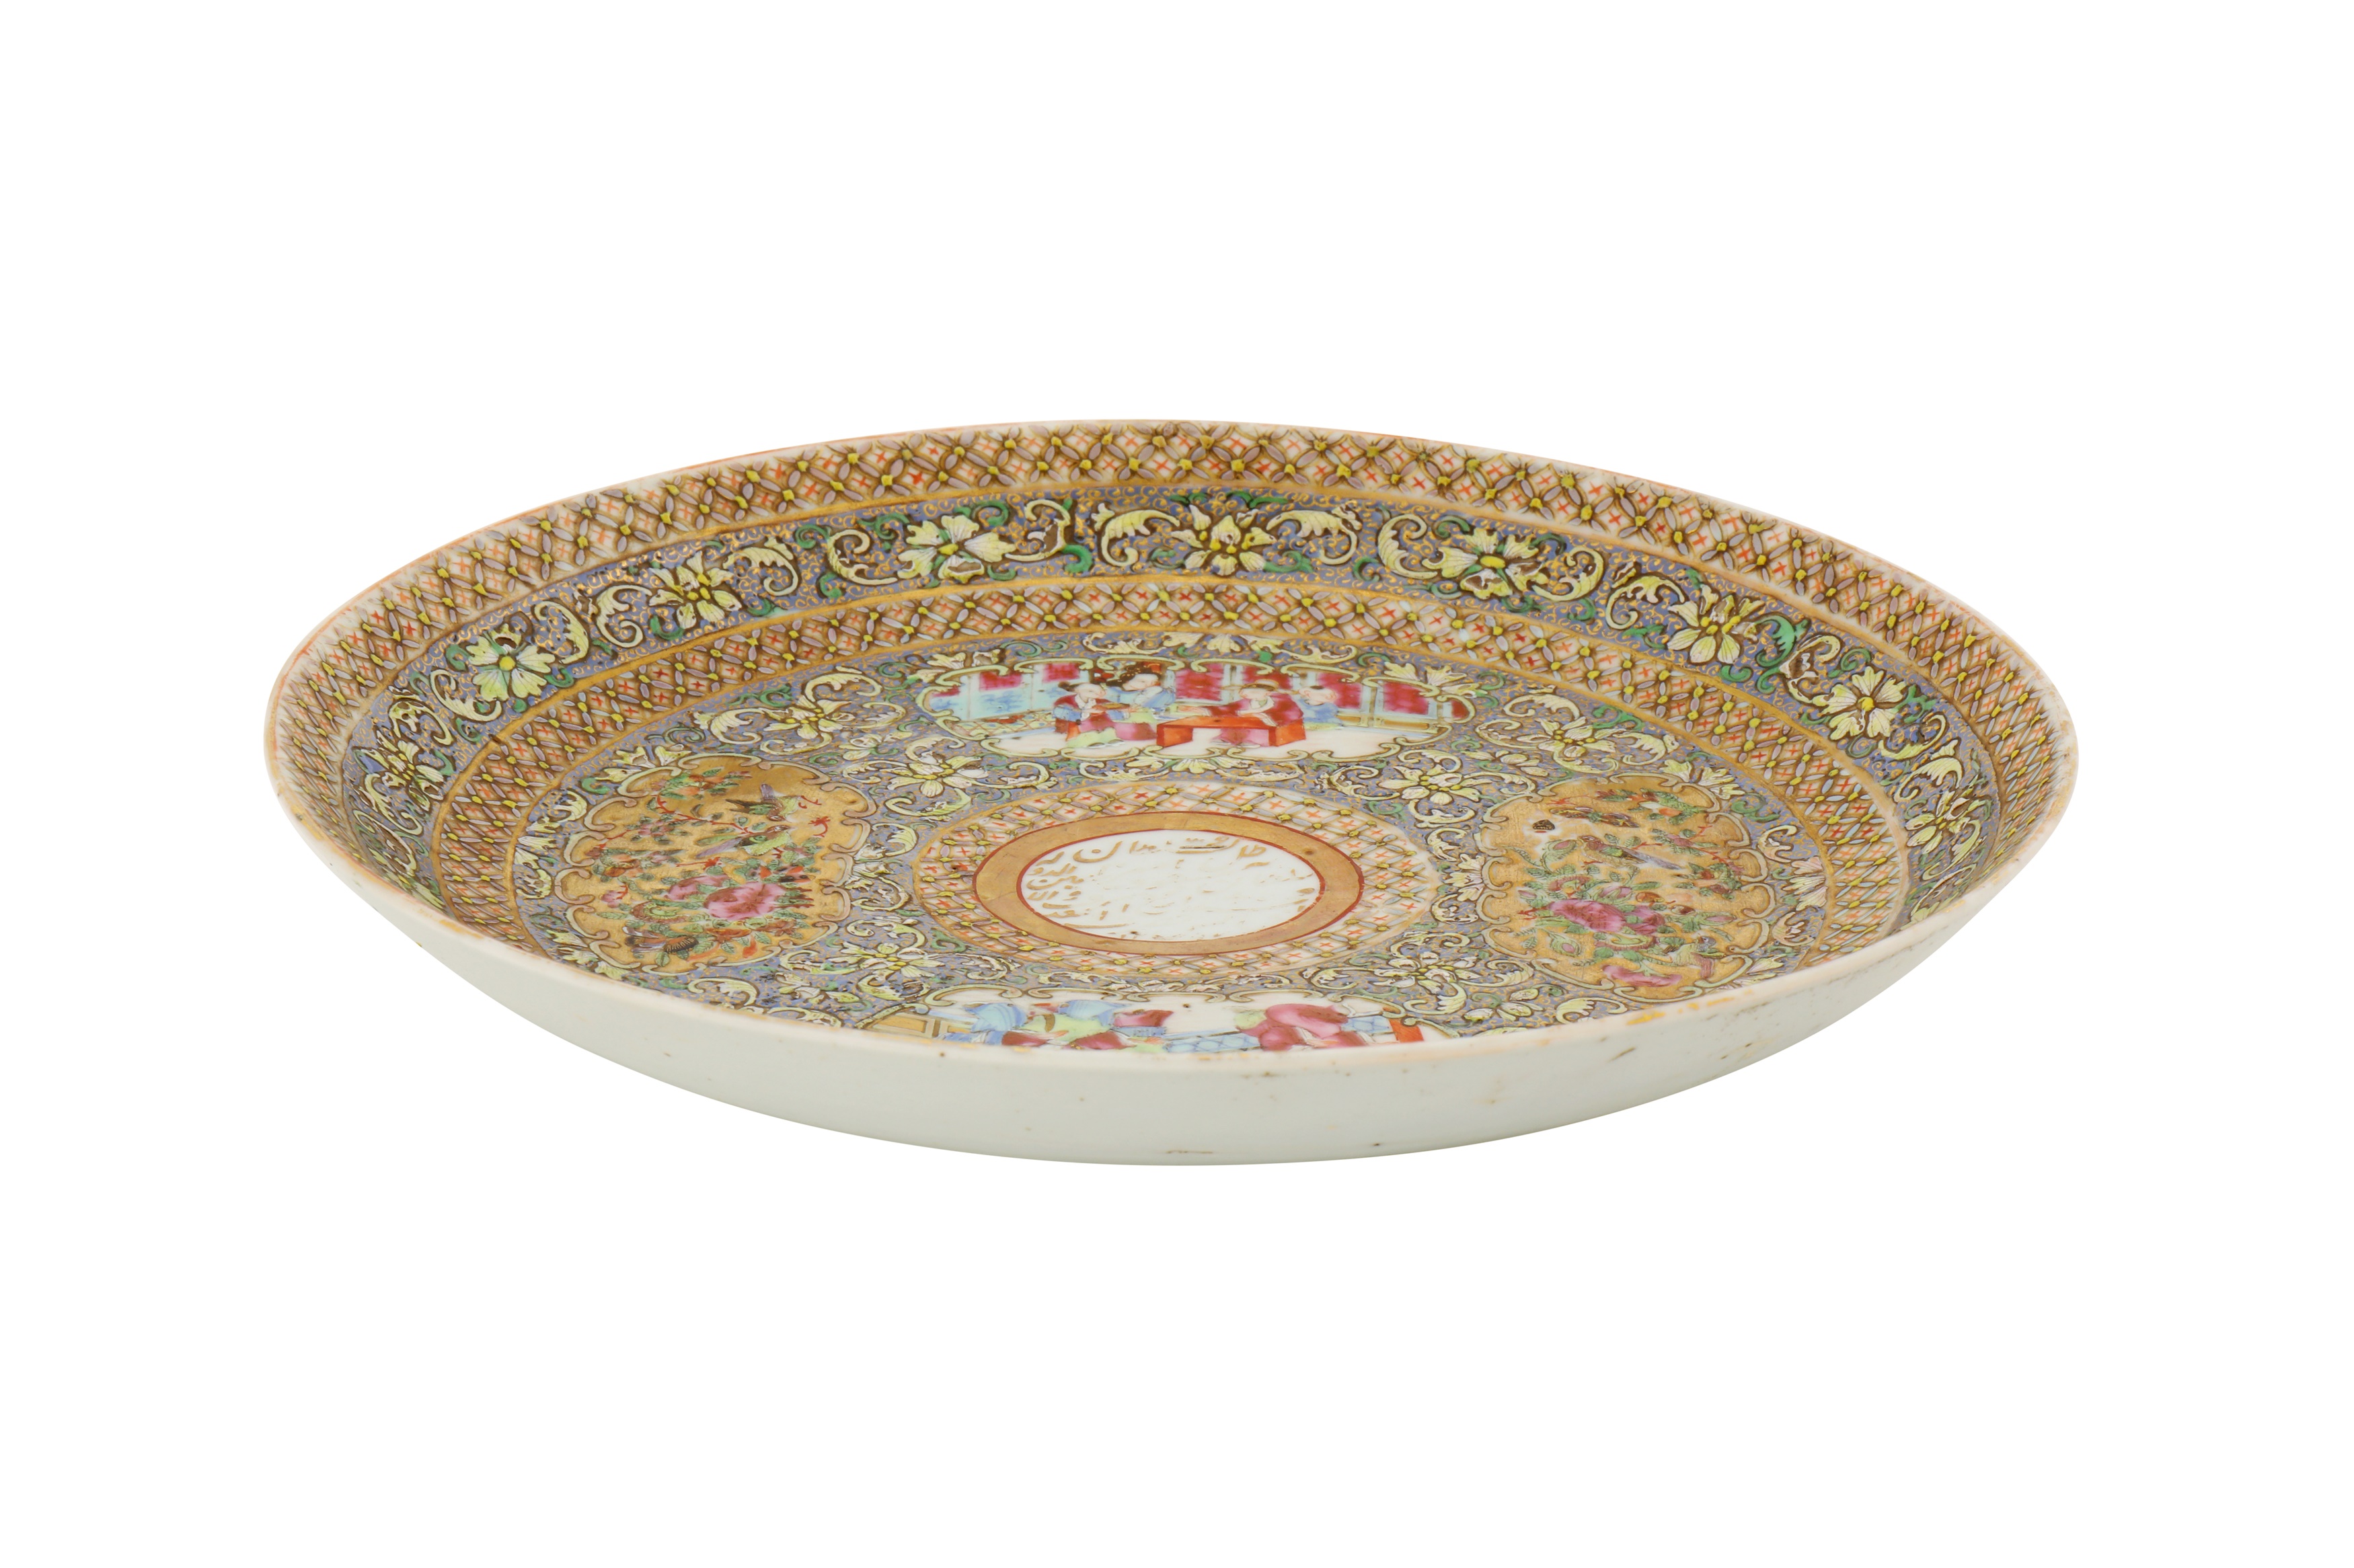 A MEDIUM SIZED BOWL AND DISH FROM THE ZILL AL-SULTAN CANTON PORCELAIN SERVICE - Image 6 of 8